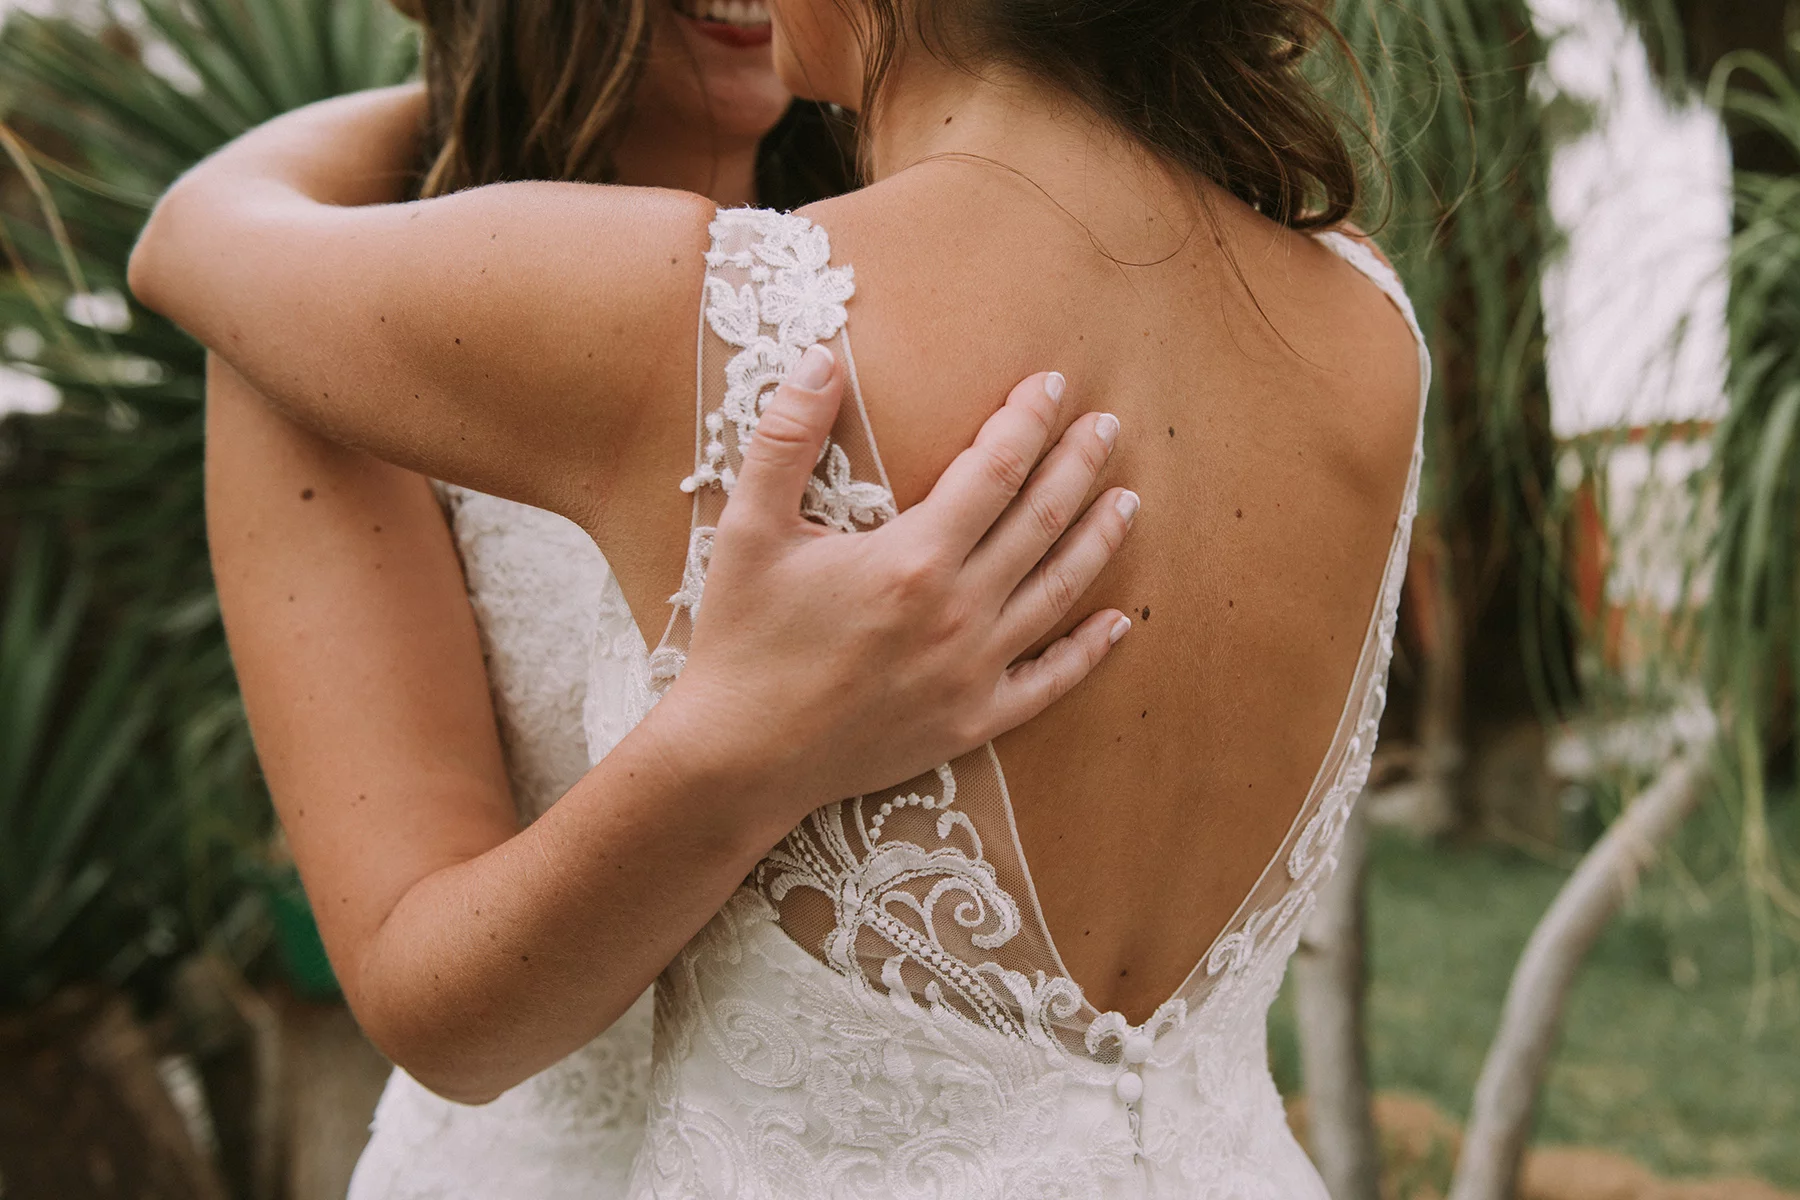 Two brides embracing at their wedding